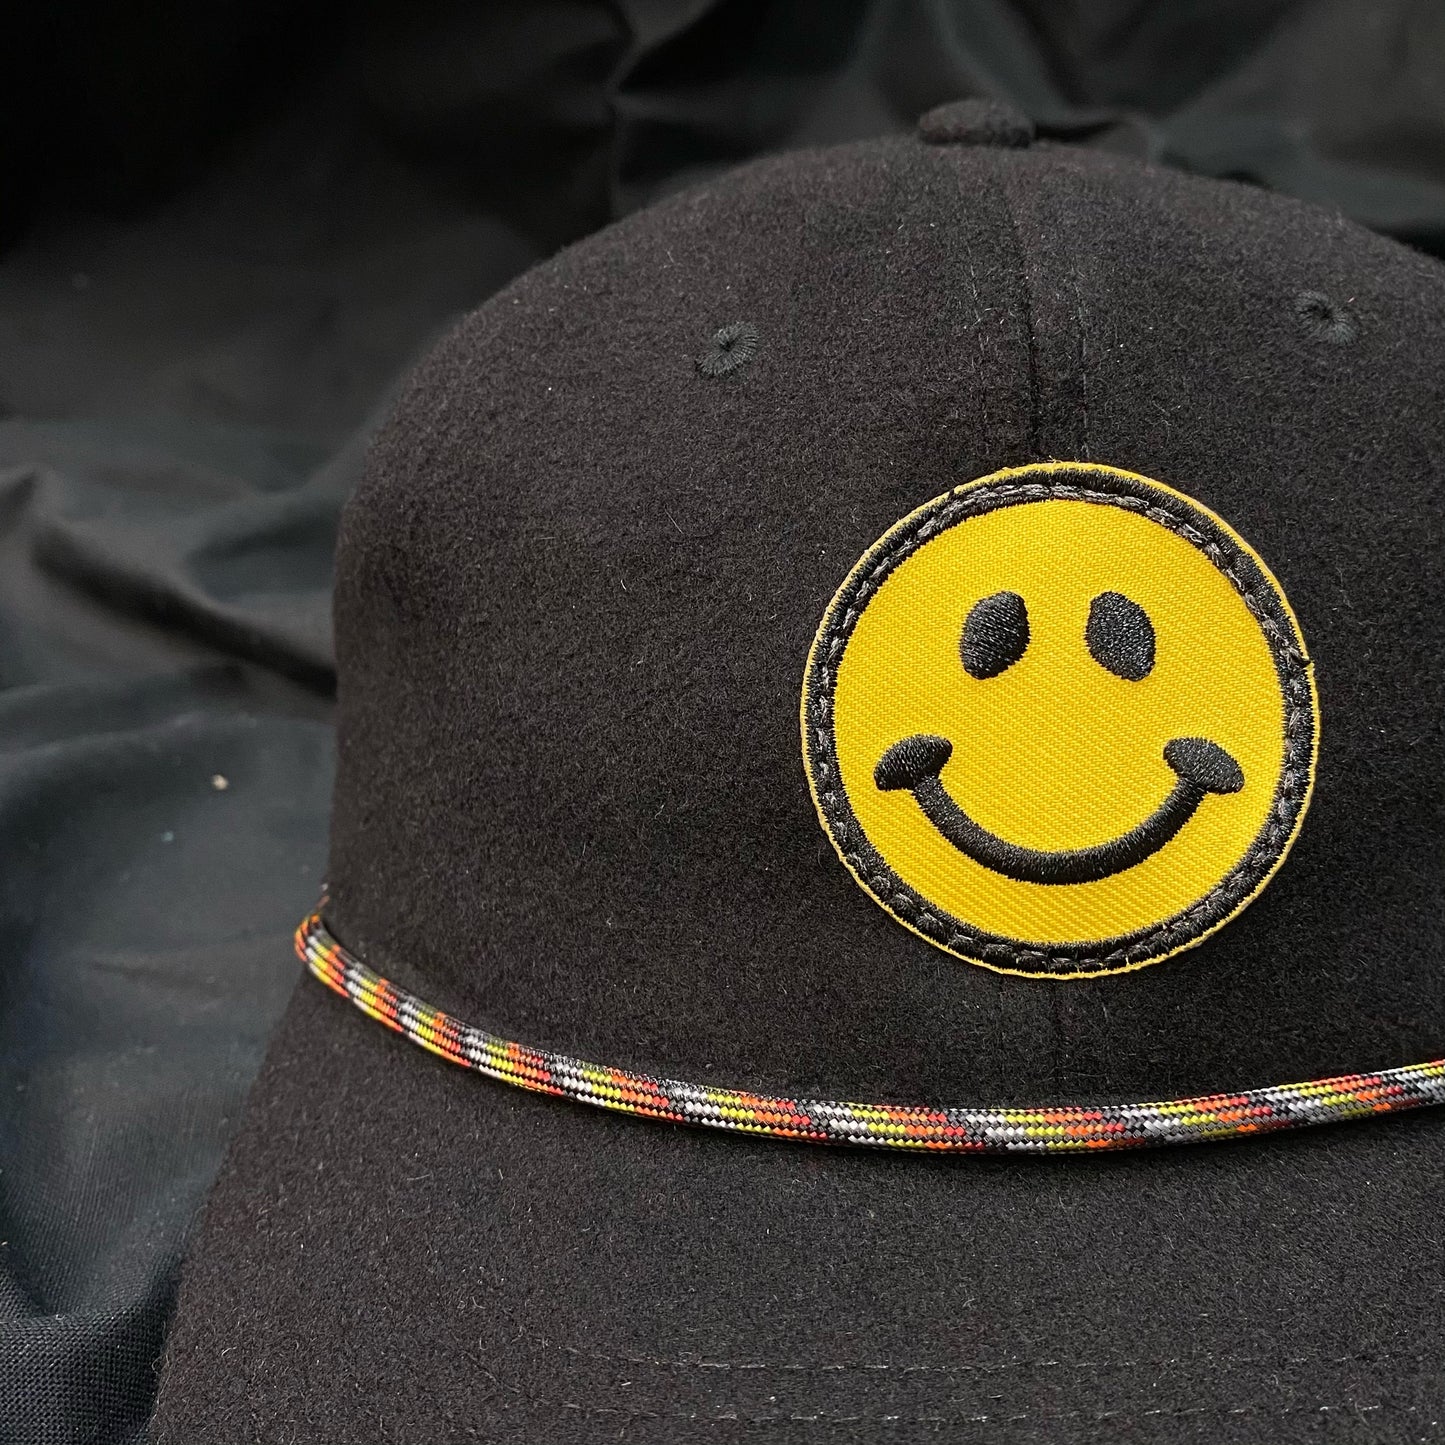 Smiley Rope Hat